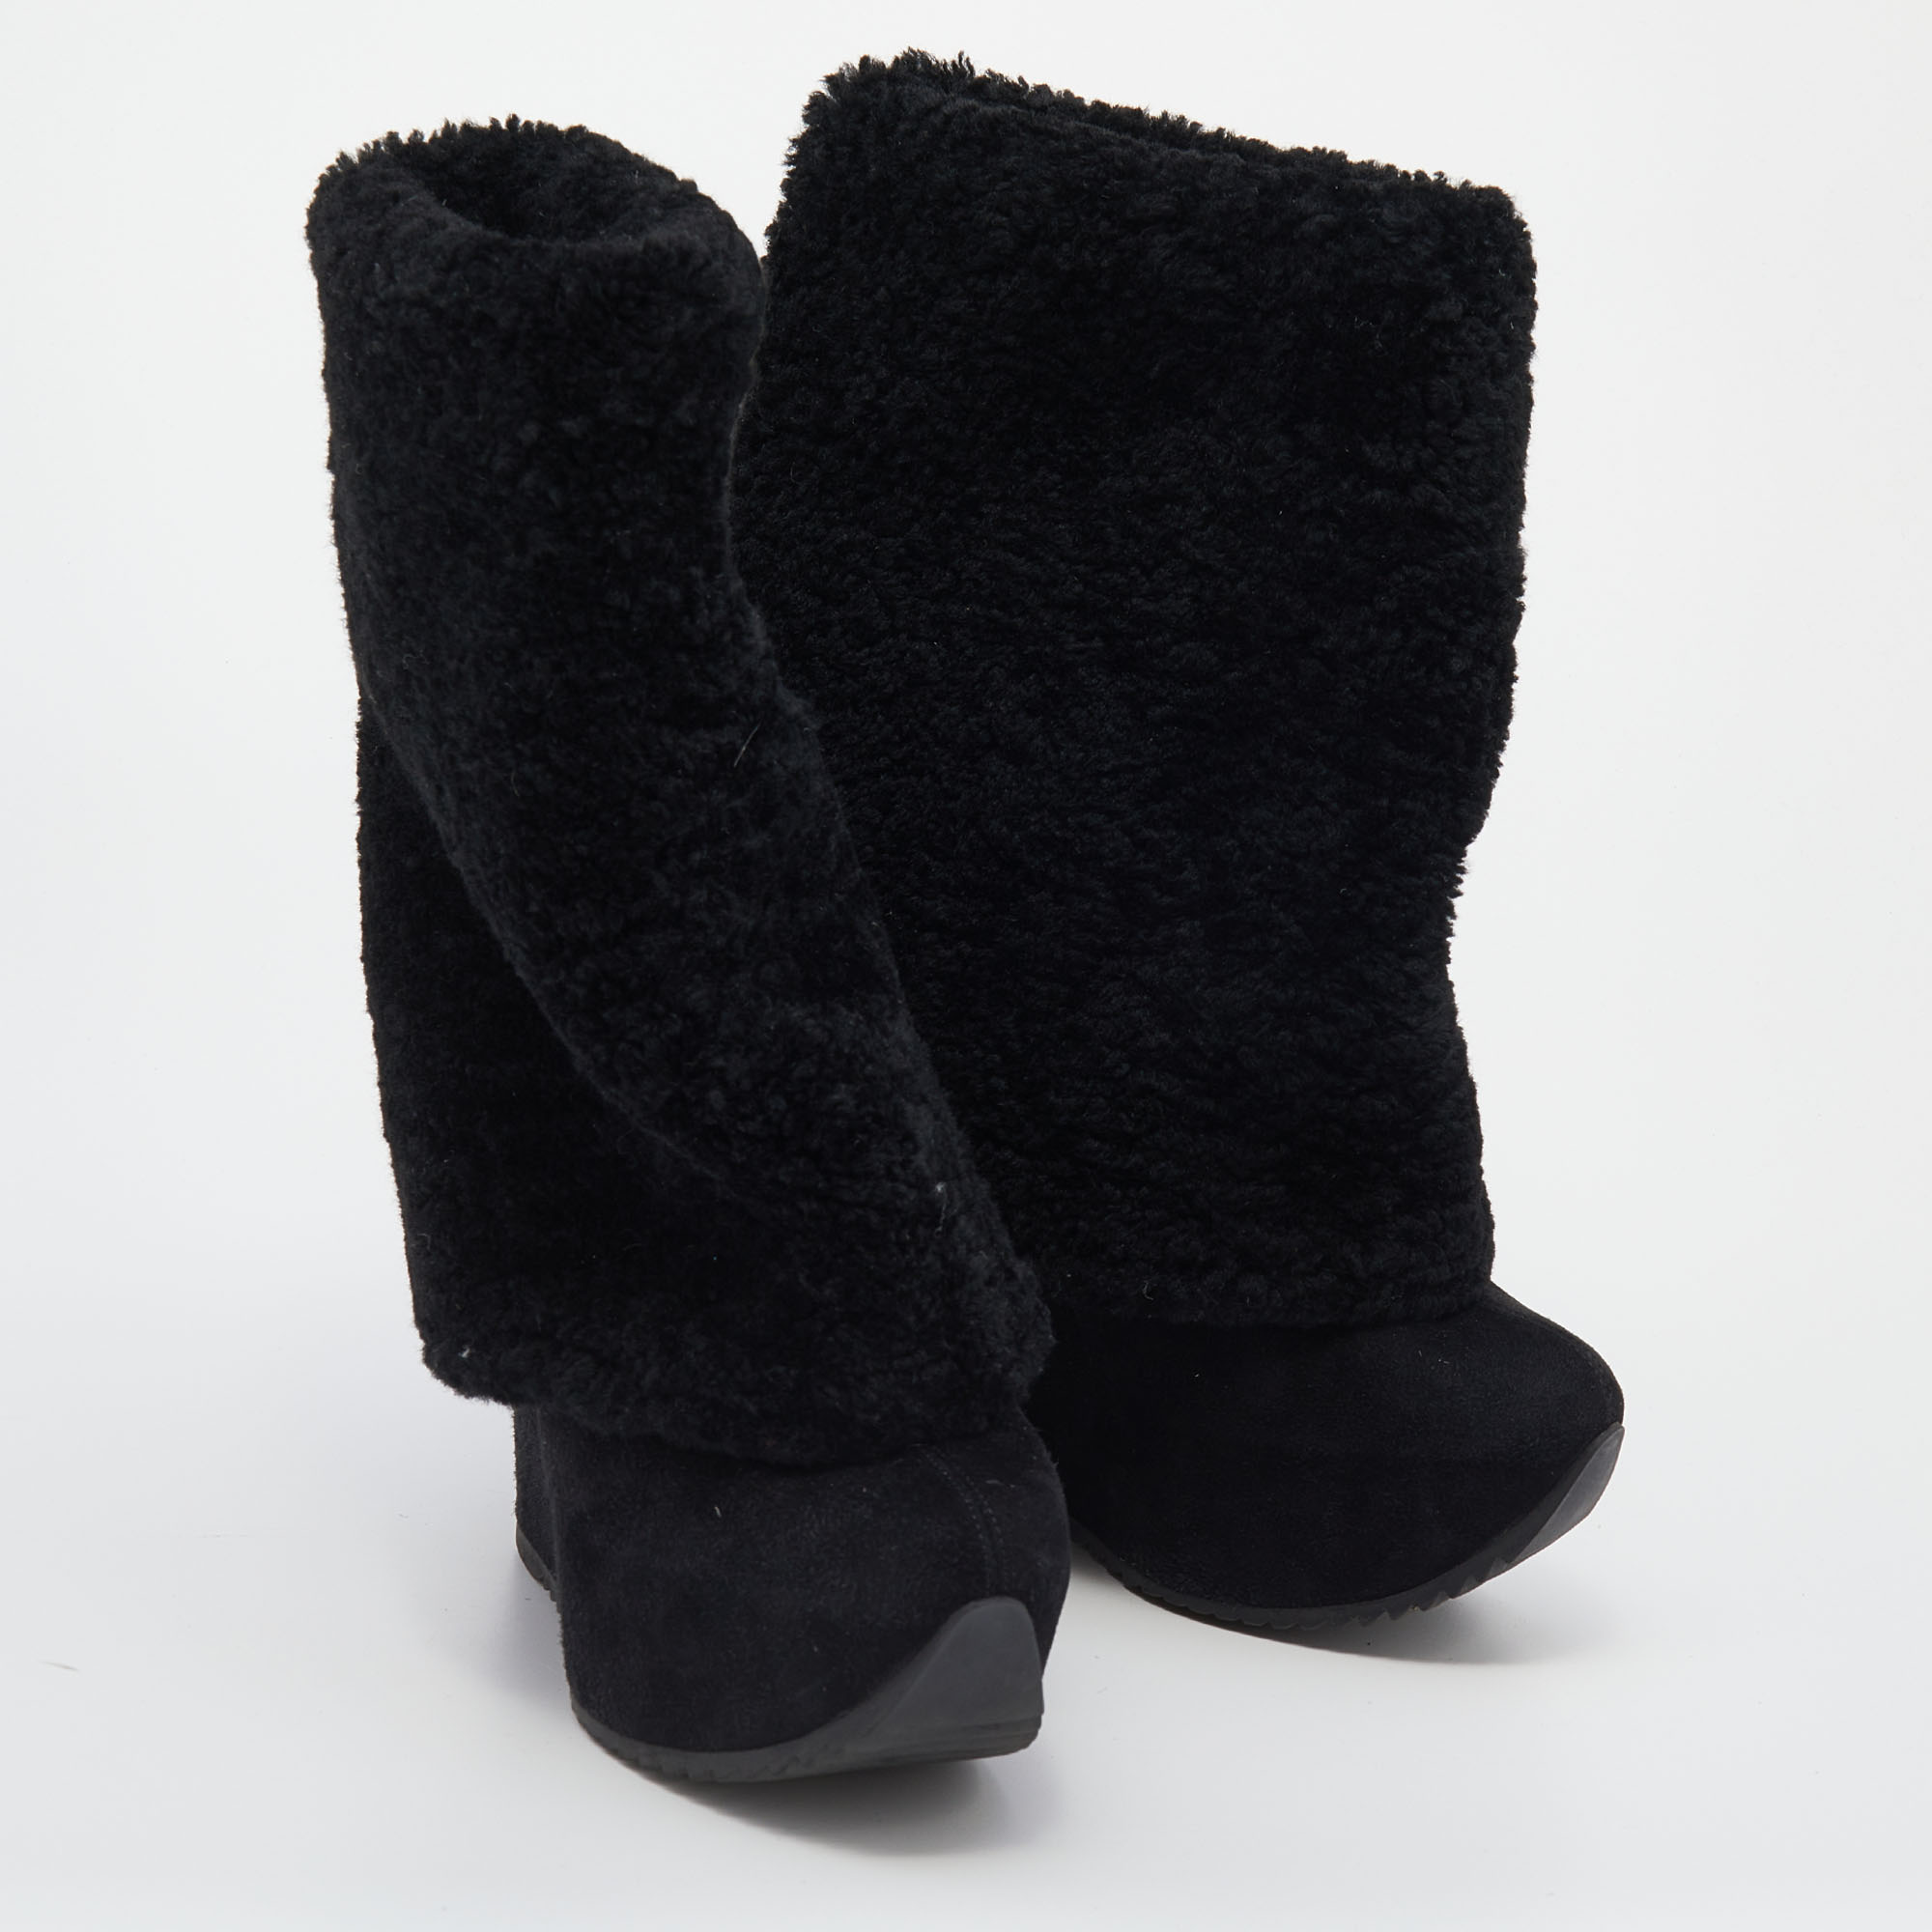 Saint Laurent Black Wool And Suede Wedge Boots Size 38